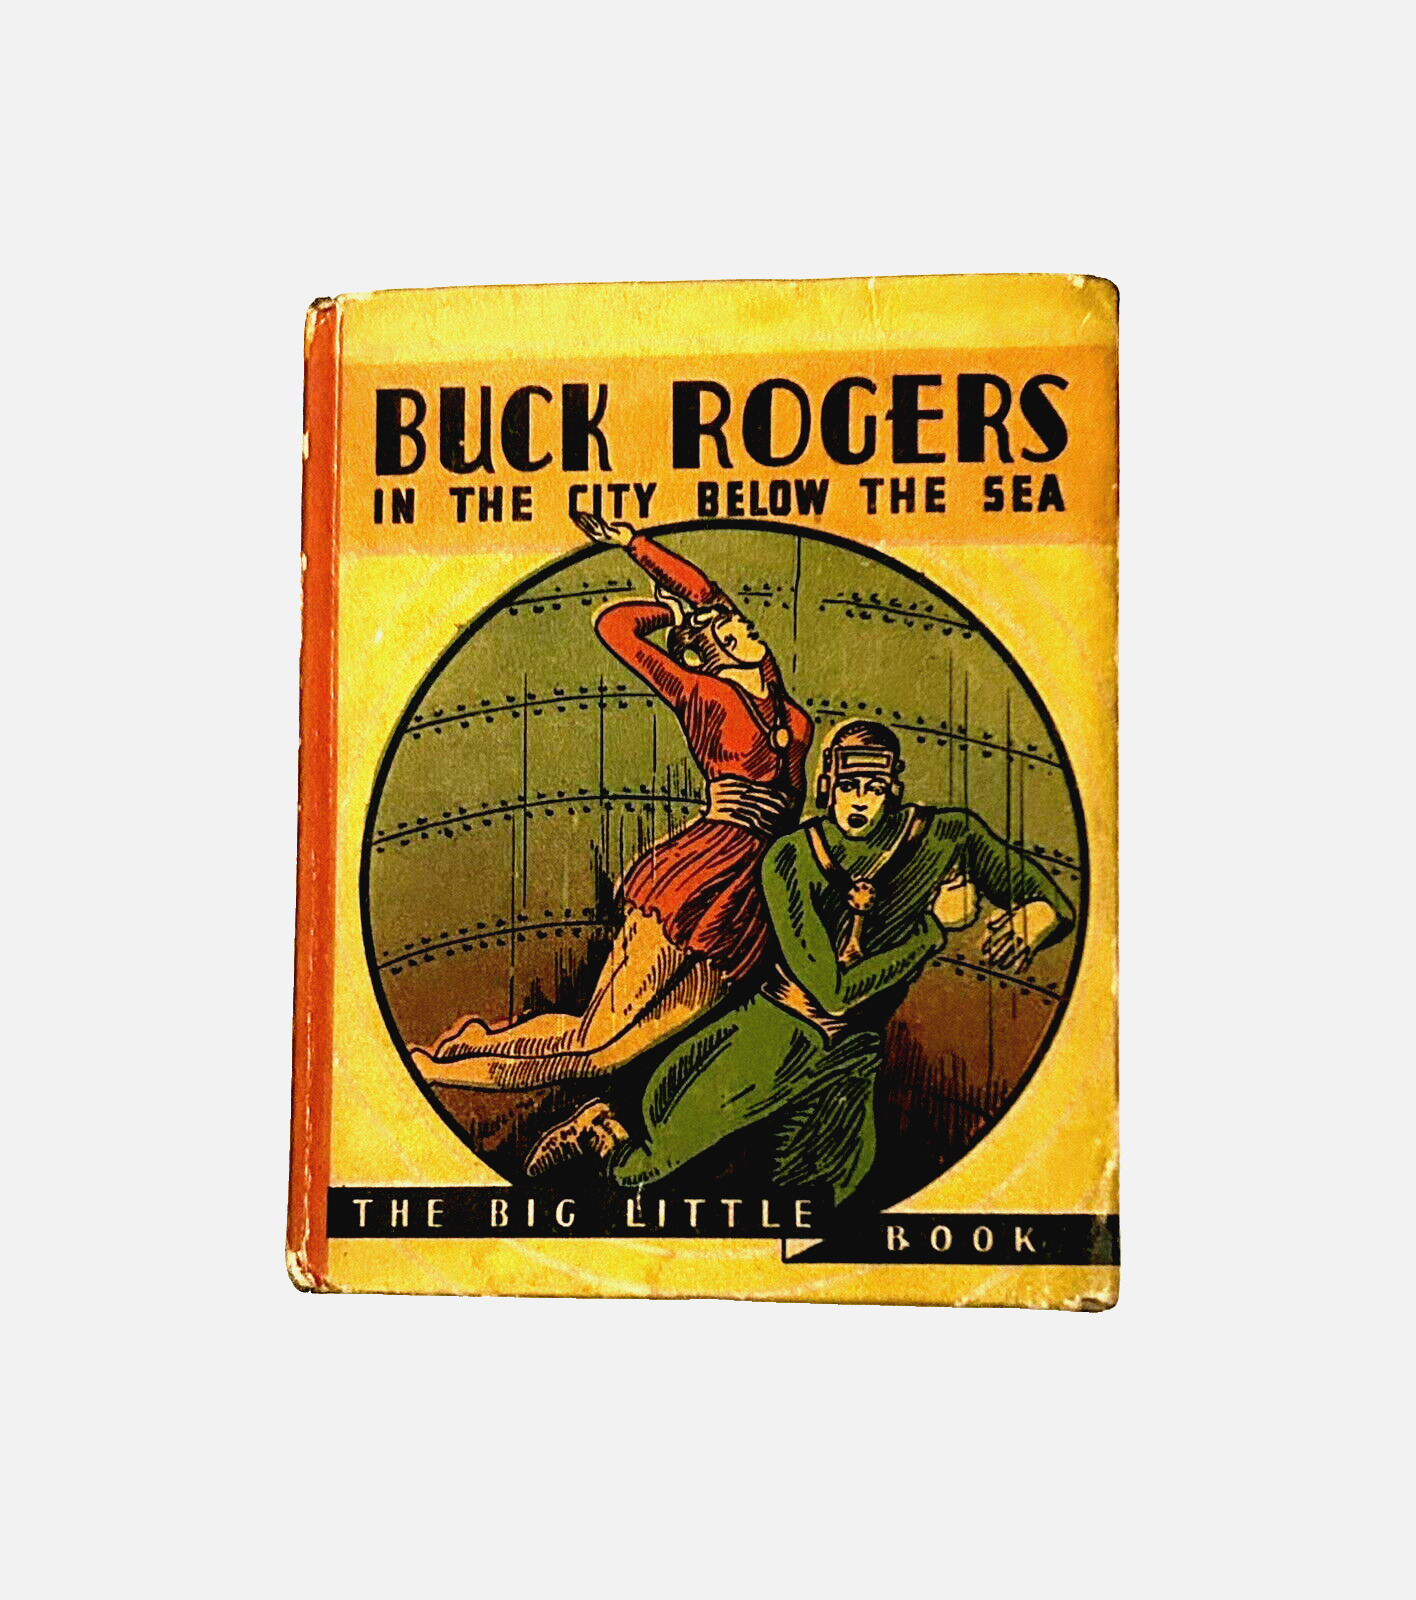 1934 Big Little Book # 765 - Buck Rogers in the City Below The Sea - RARE